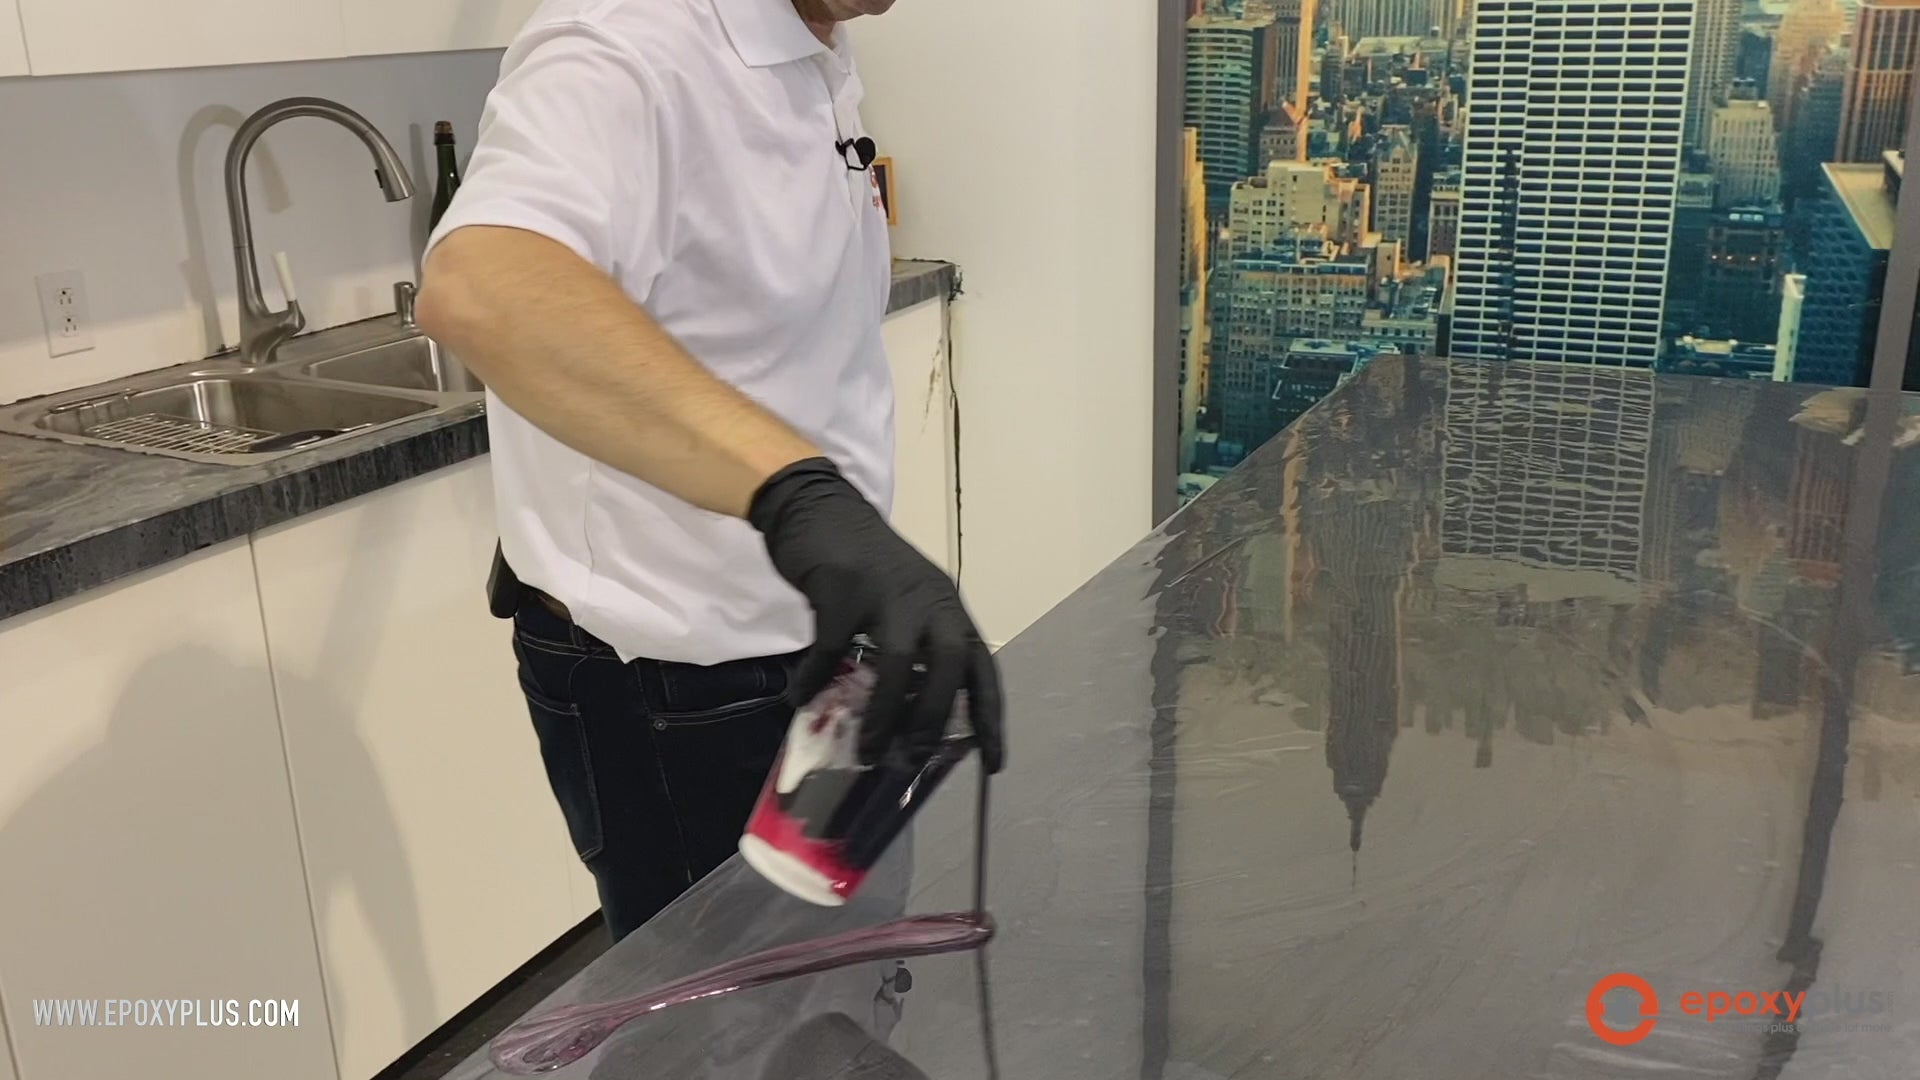 Purchase the Carrara marble epoxy kit online at Stone Coat Countertops. Our  Carrara marble epoxy countertop kit is affordable, easy to use, heat  resistant, and impact resistant. Shop for the Carrara marble